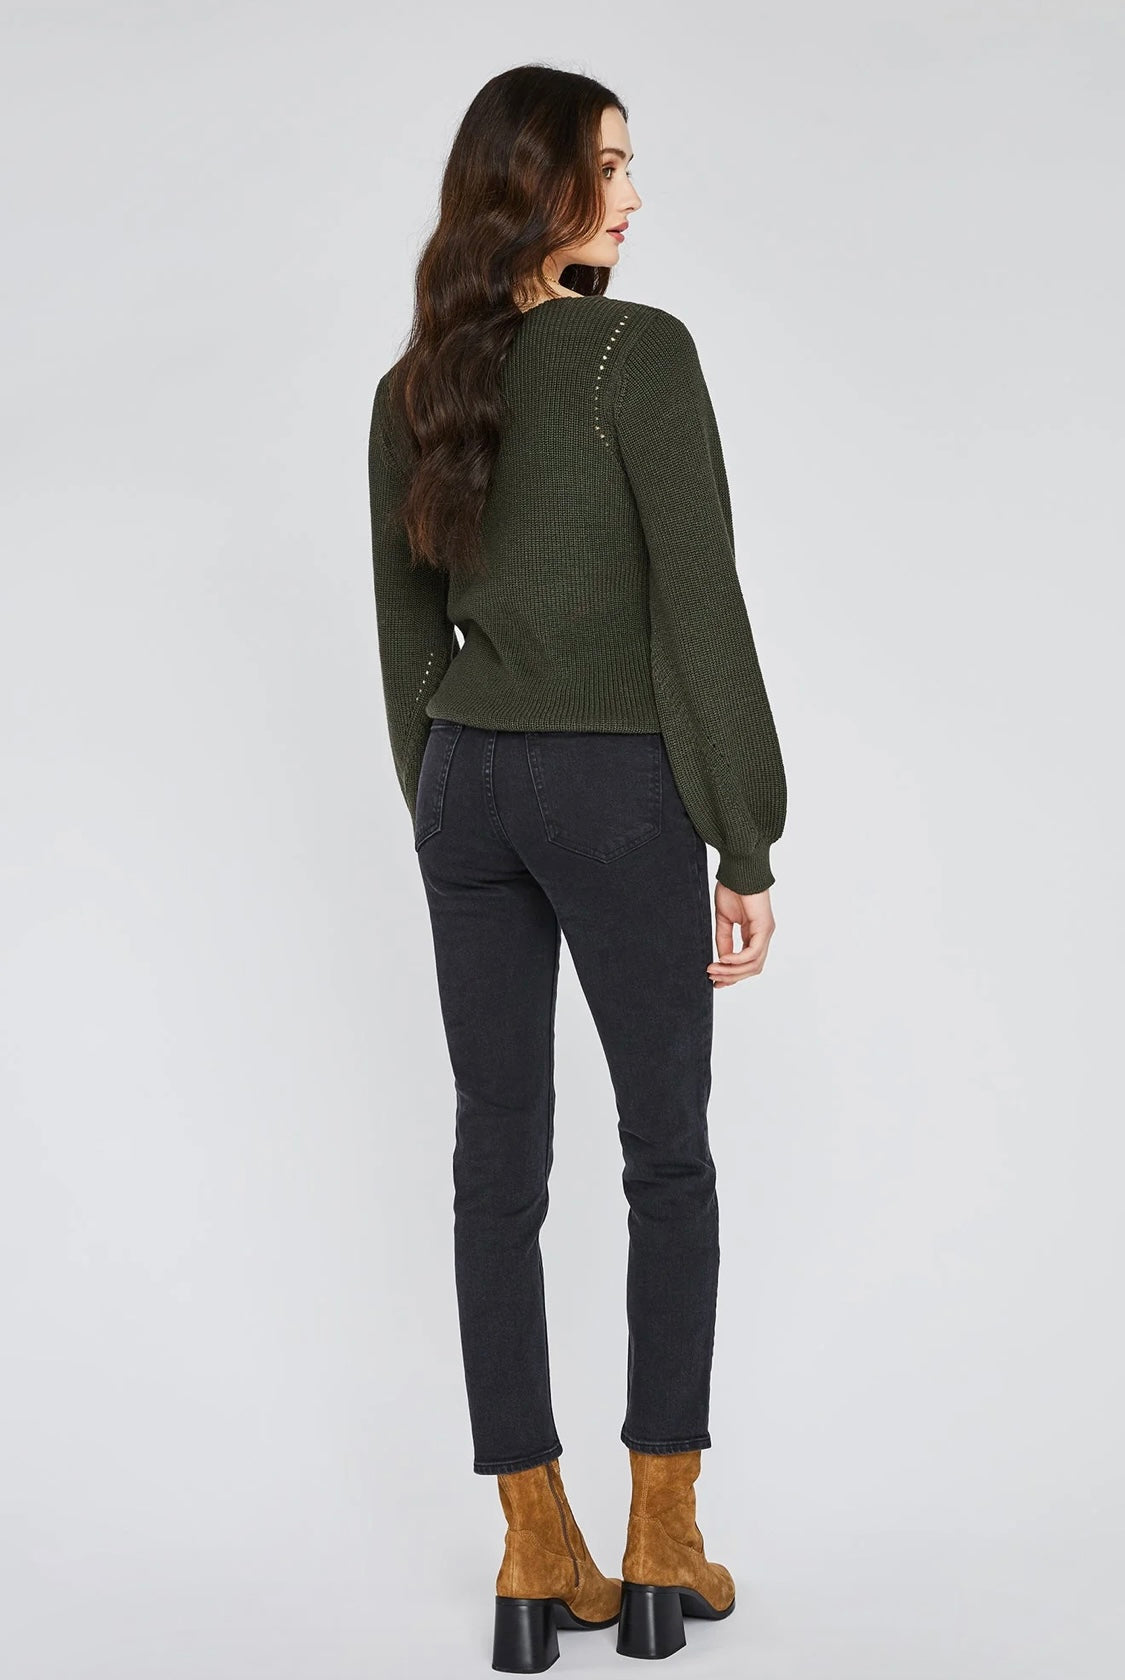 GENTLE FAWN - Hailey Sweater in Olive